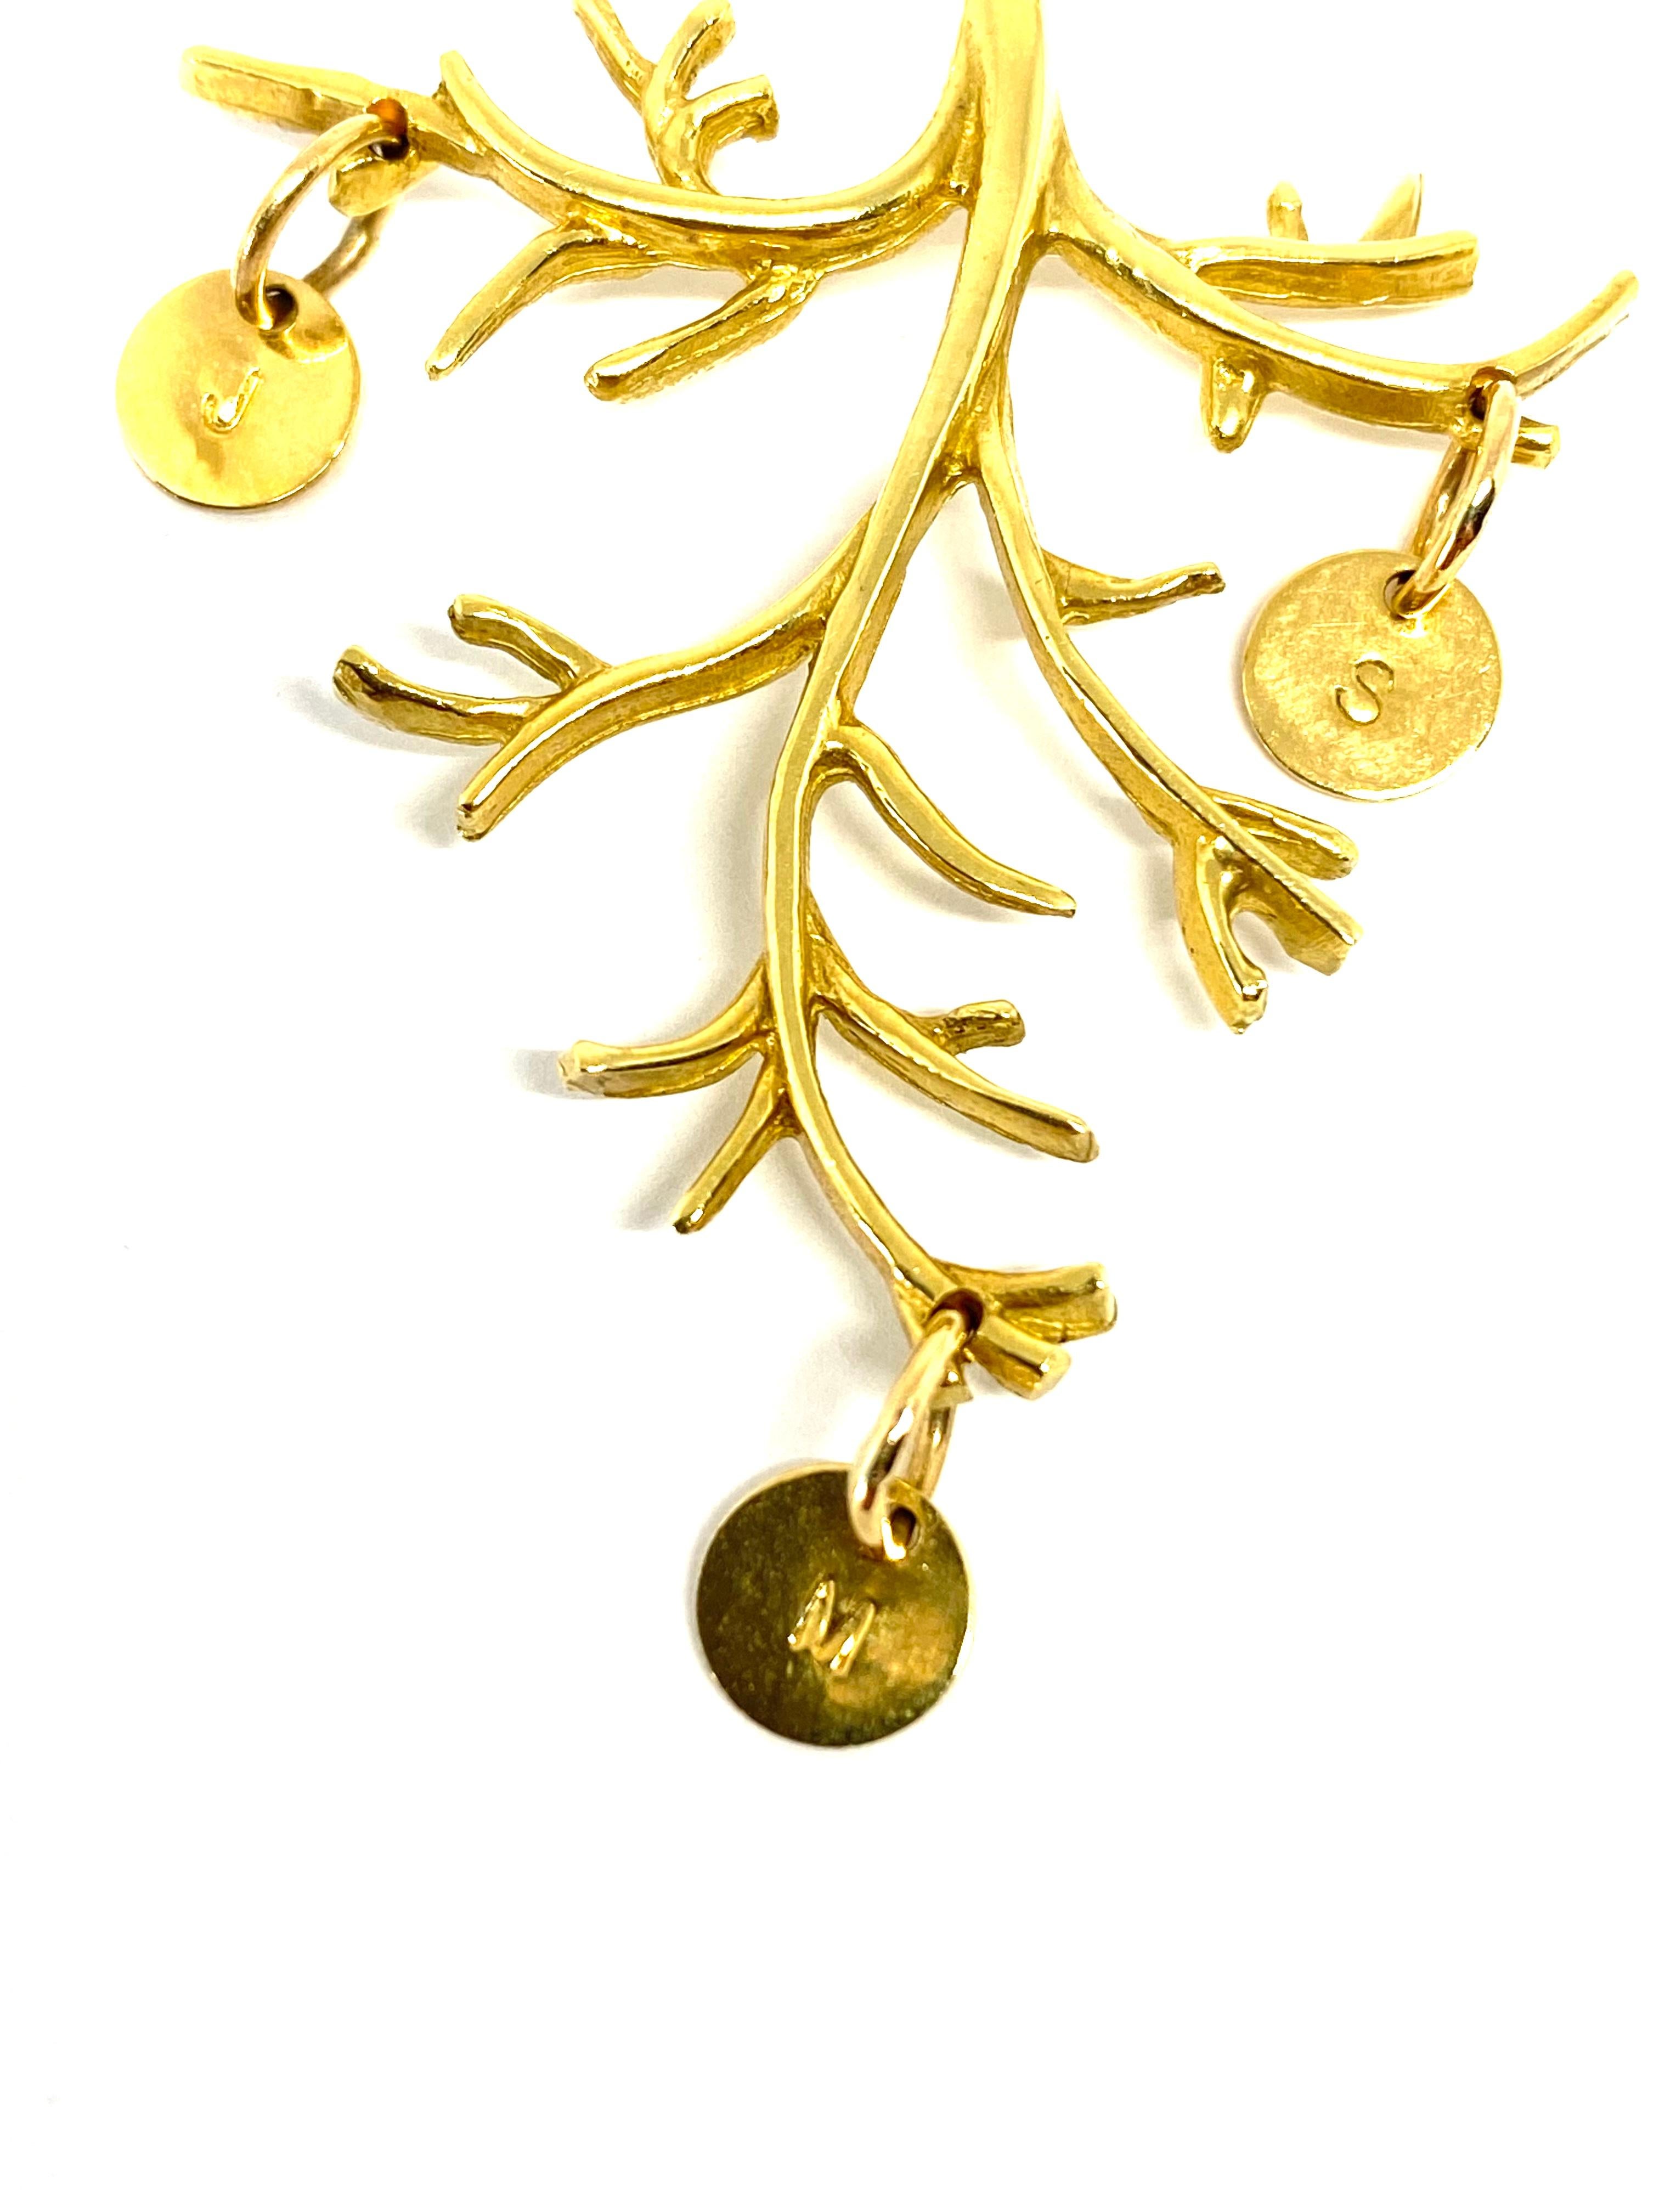 Jennifer Fisher 18k Yellow Gold Branch Pendant w/ J M S Initial

Product details:
750 18K yellow gold
Branch pendant with three small rounded coin like charms stamped with J, M, S on the front and designer signature JF on the back
Total weight is